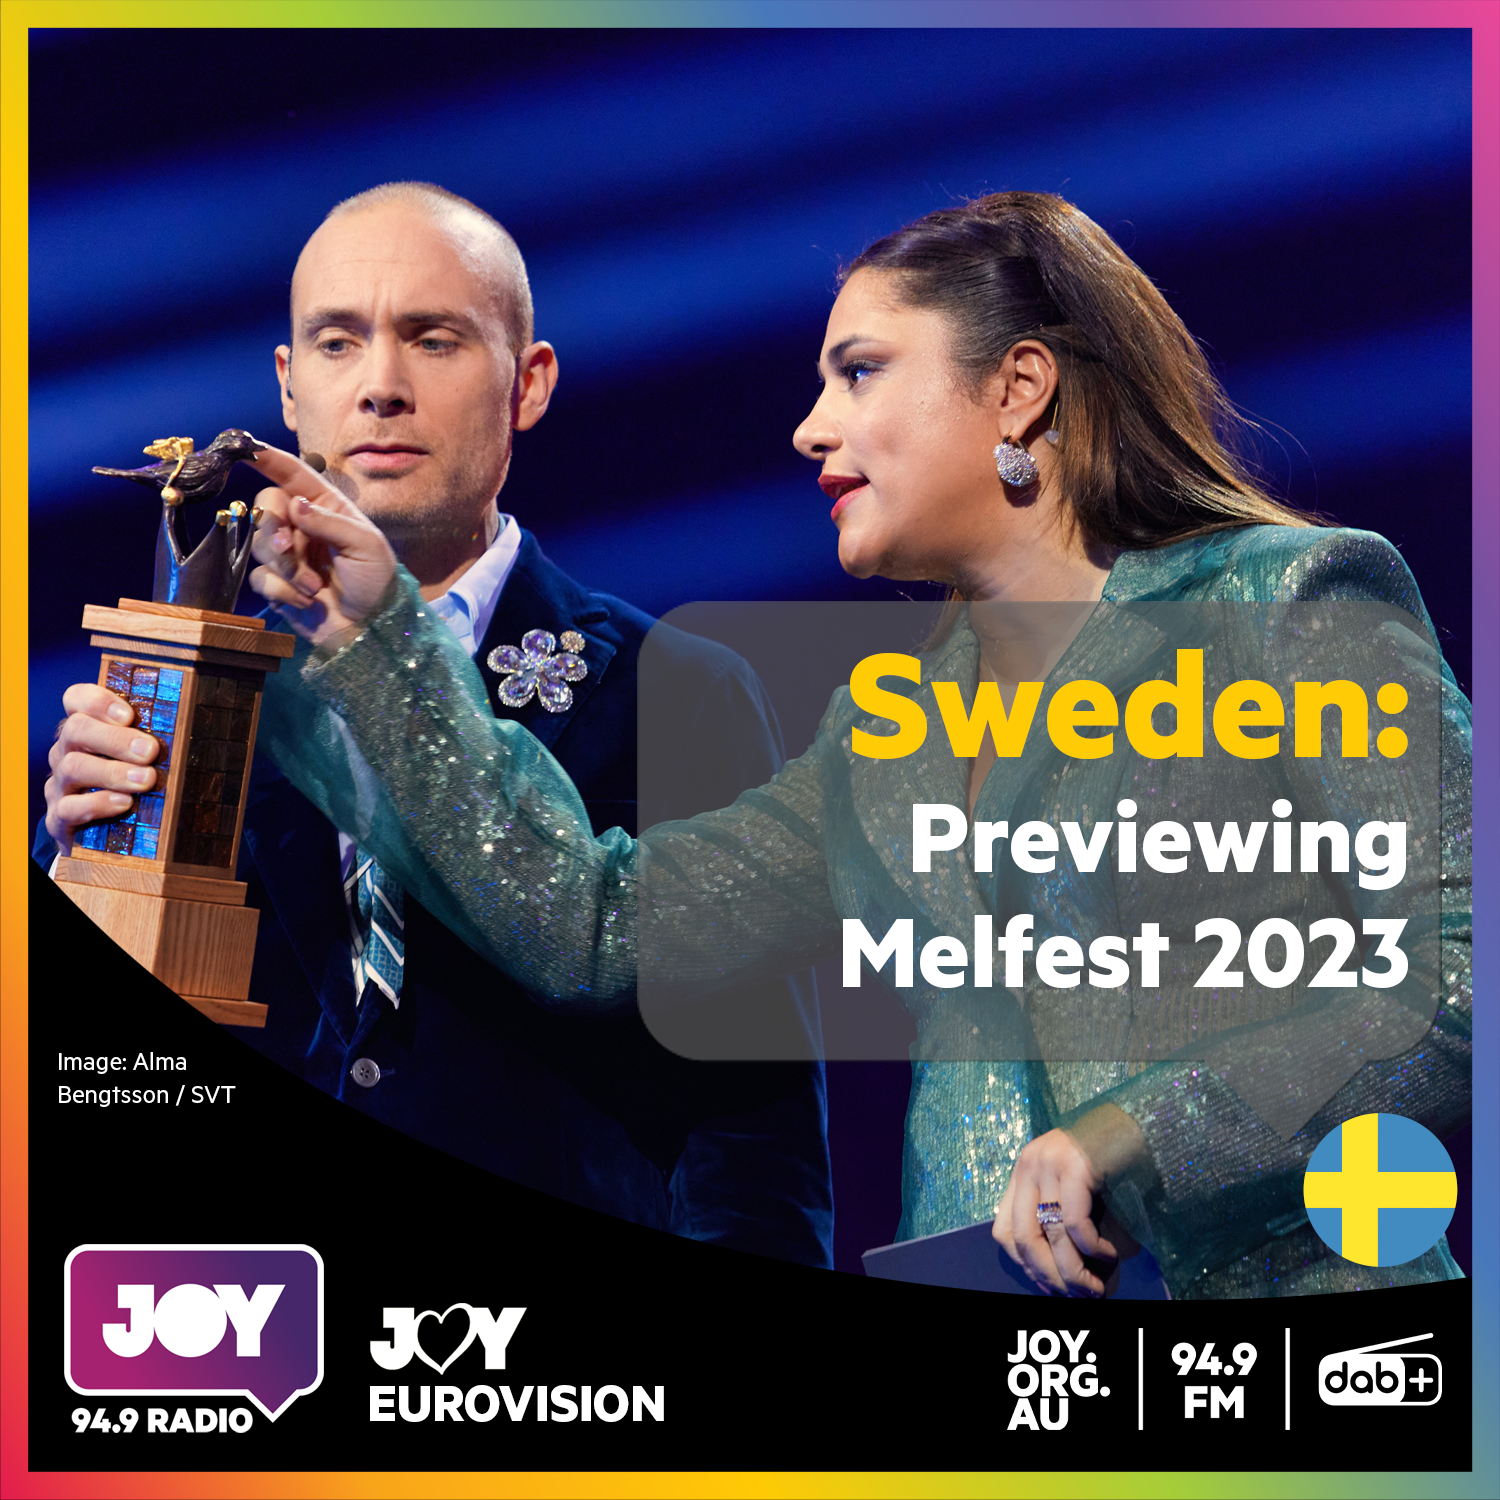 🇸🇪 Previewing Melodifestivalen 2023: The writing’s on Sweden’s arm